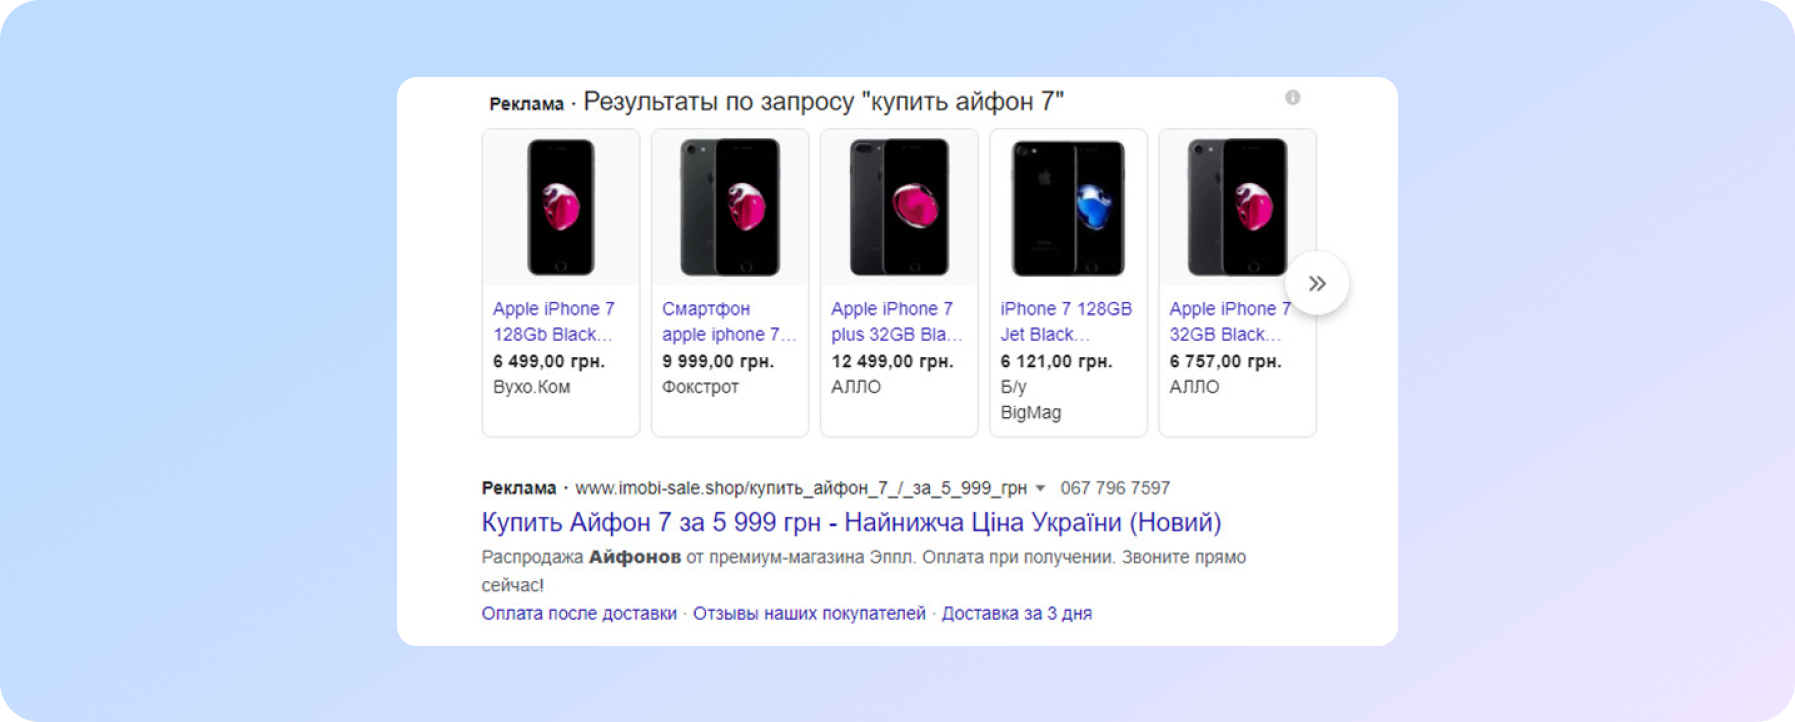 example of displaying a block of contextual advertising in search results